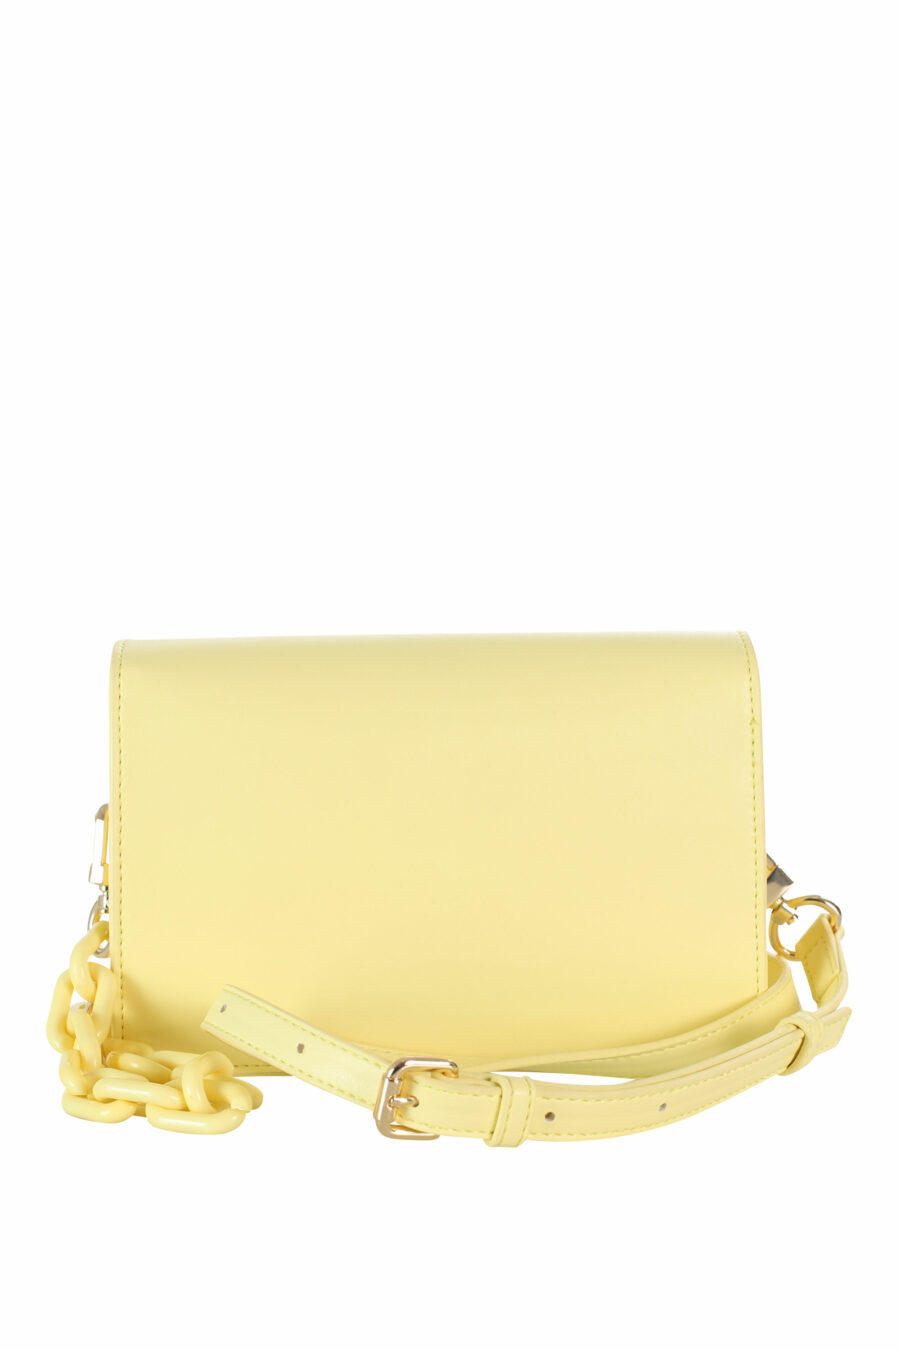 Yellow shoulder bag with eye lock and metal star - 8052672351906 3